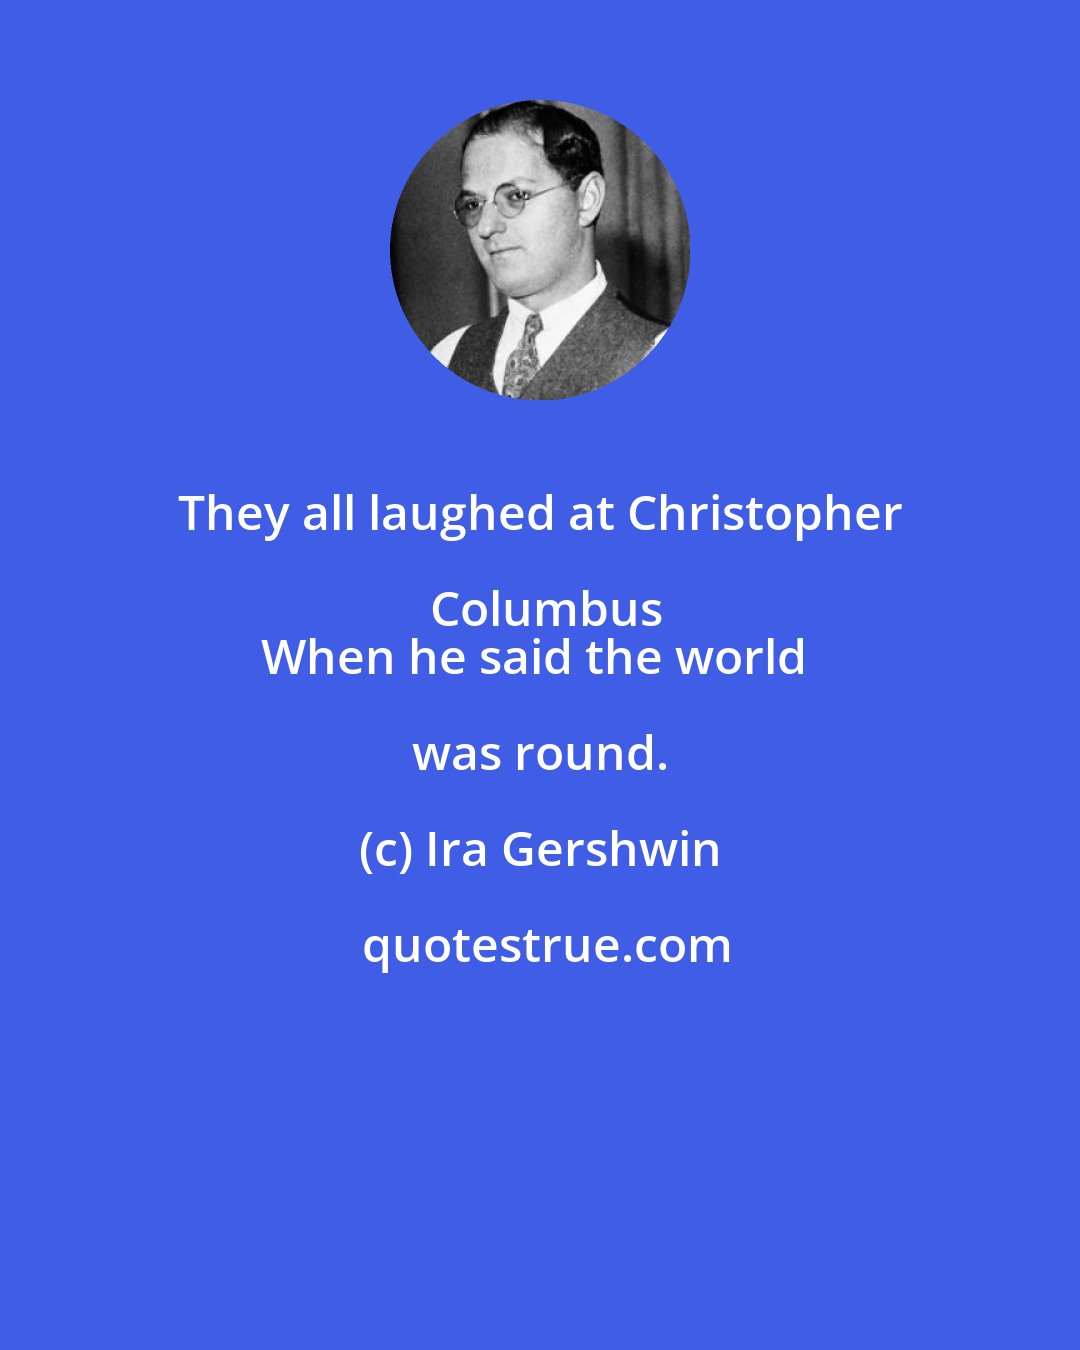 Ira Gershwin: They all laughed at Christopher Columbus
When he said the world was round.